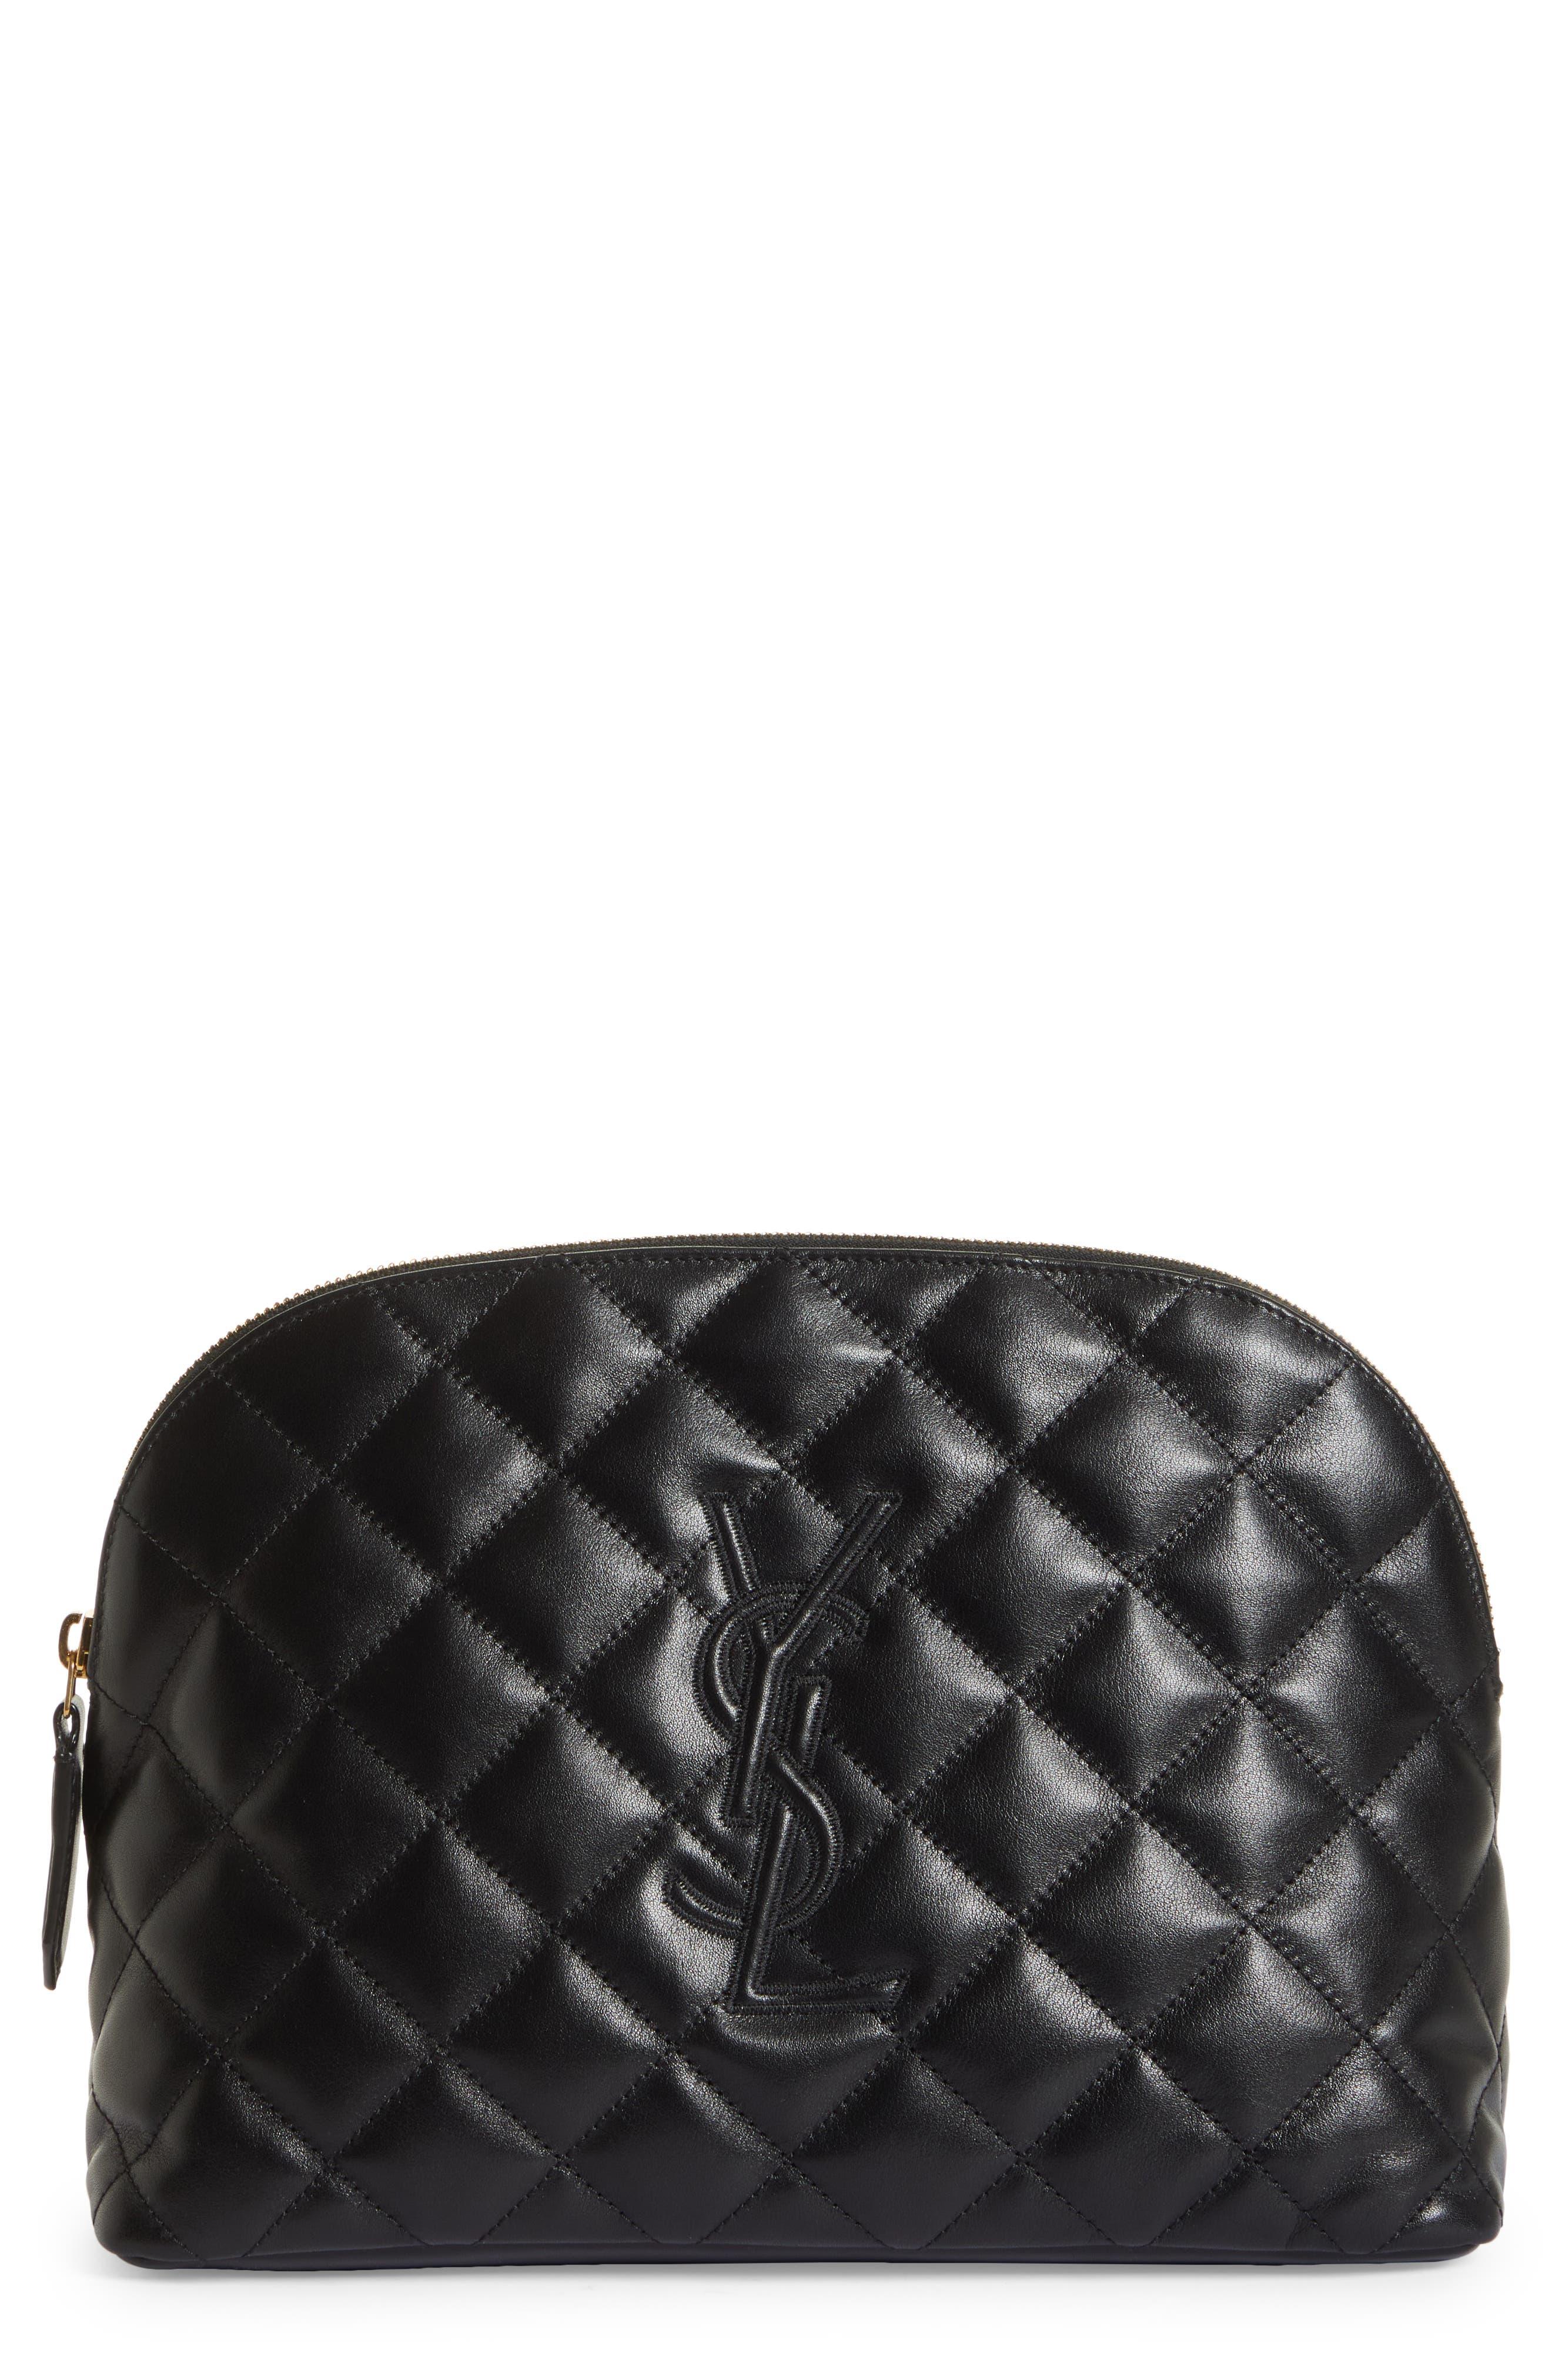 Saint Laurent Monogram quilted leather pouch for Women - Black in